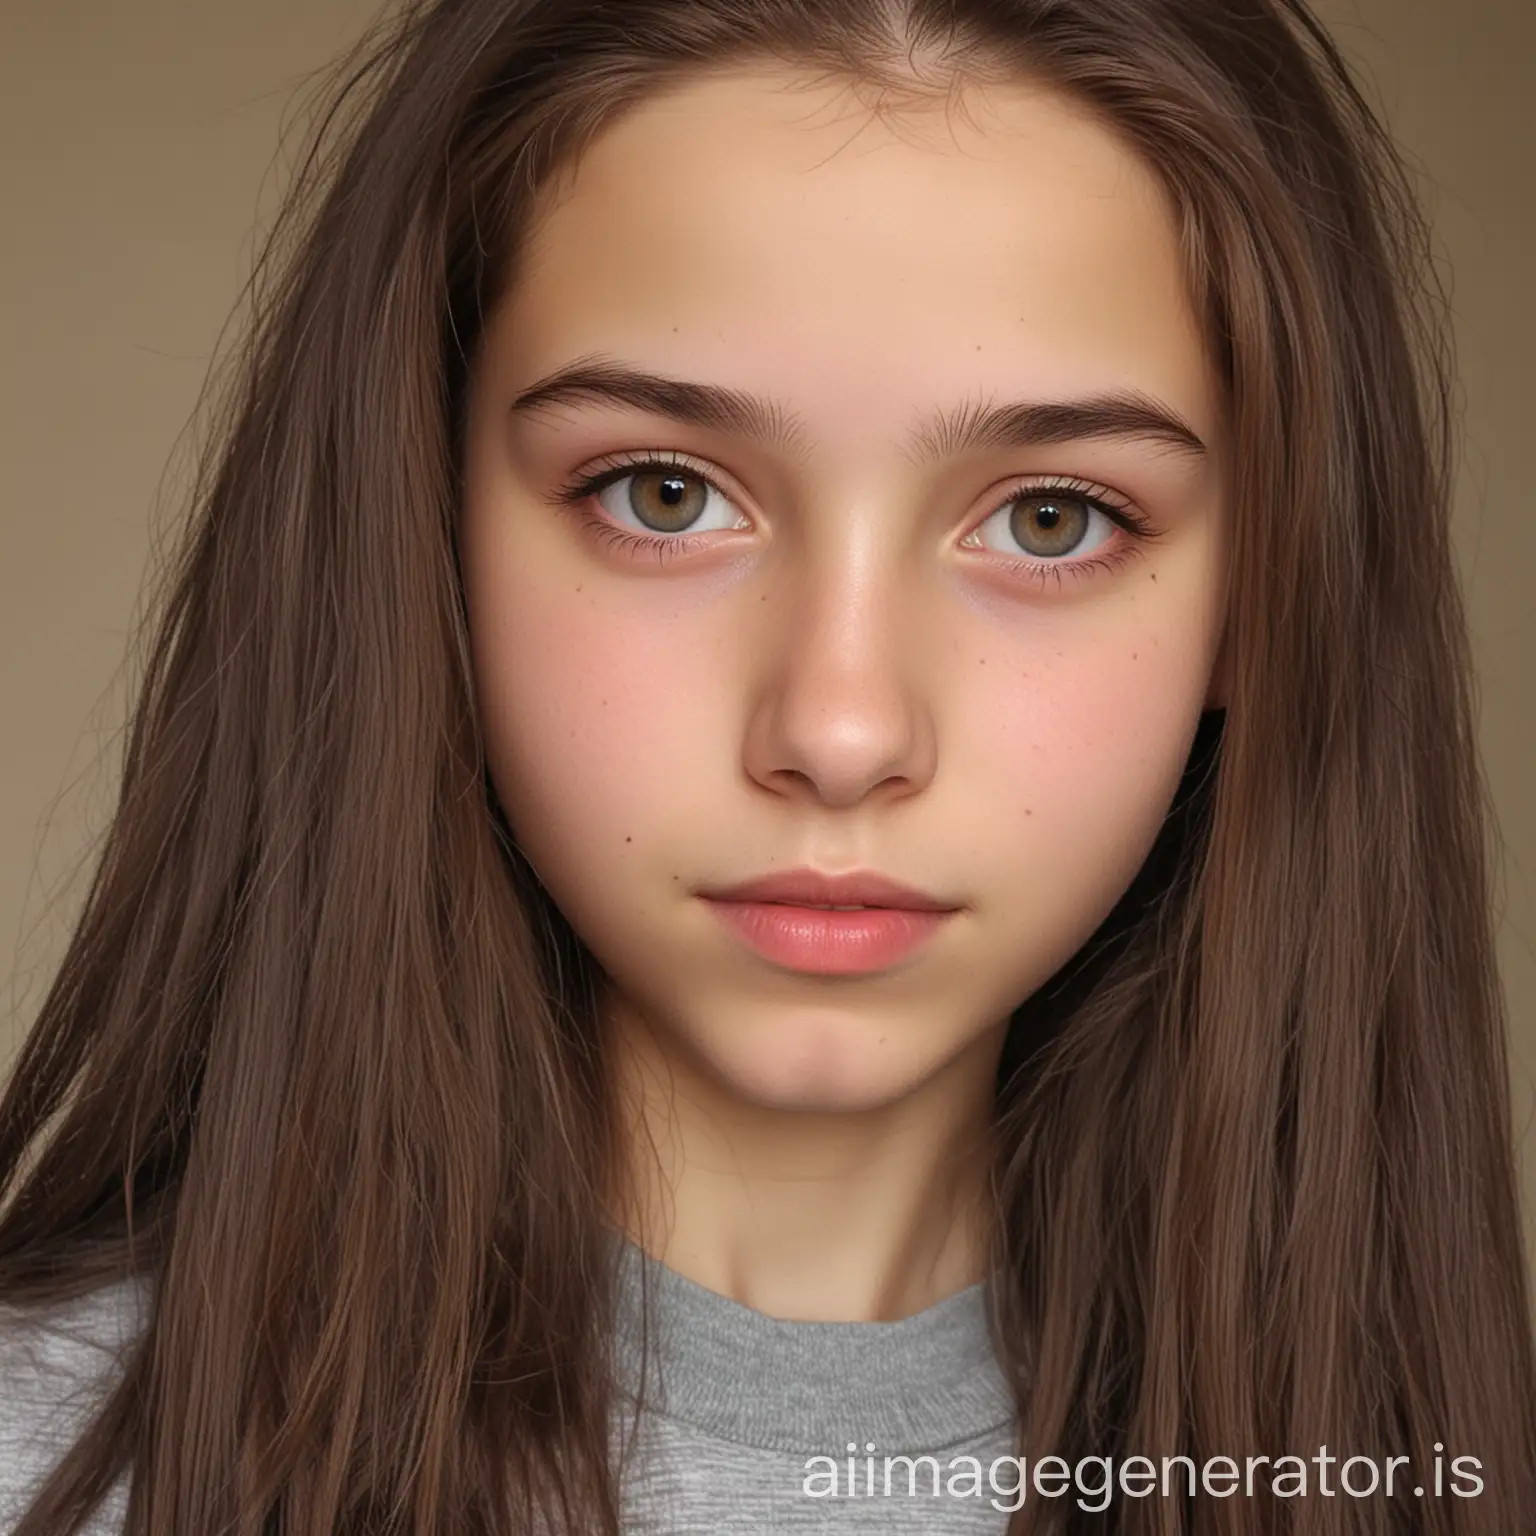 Portrait-of-a-14YearOld-Girl-with-Thoughtful-Expression